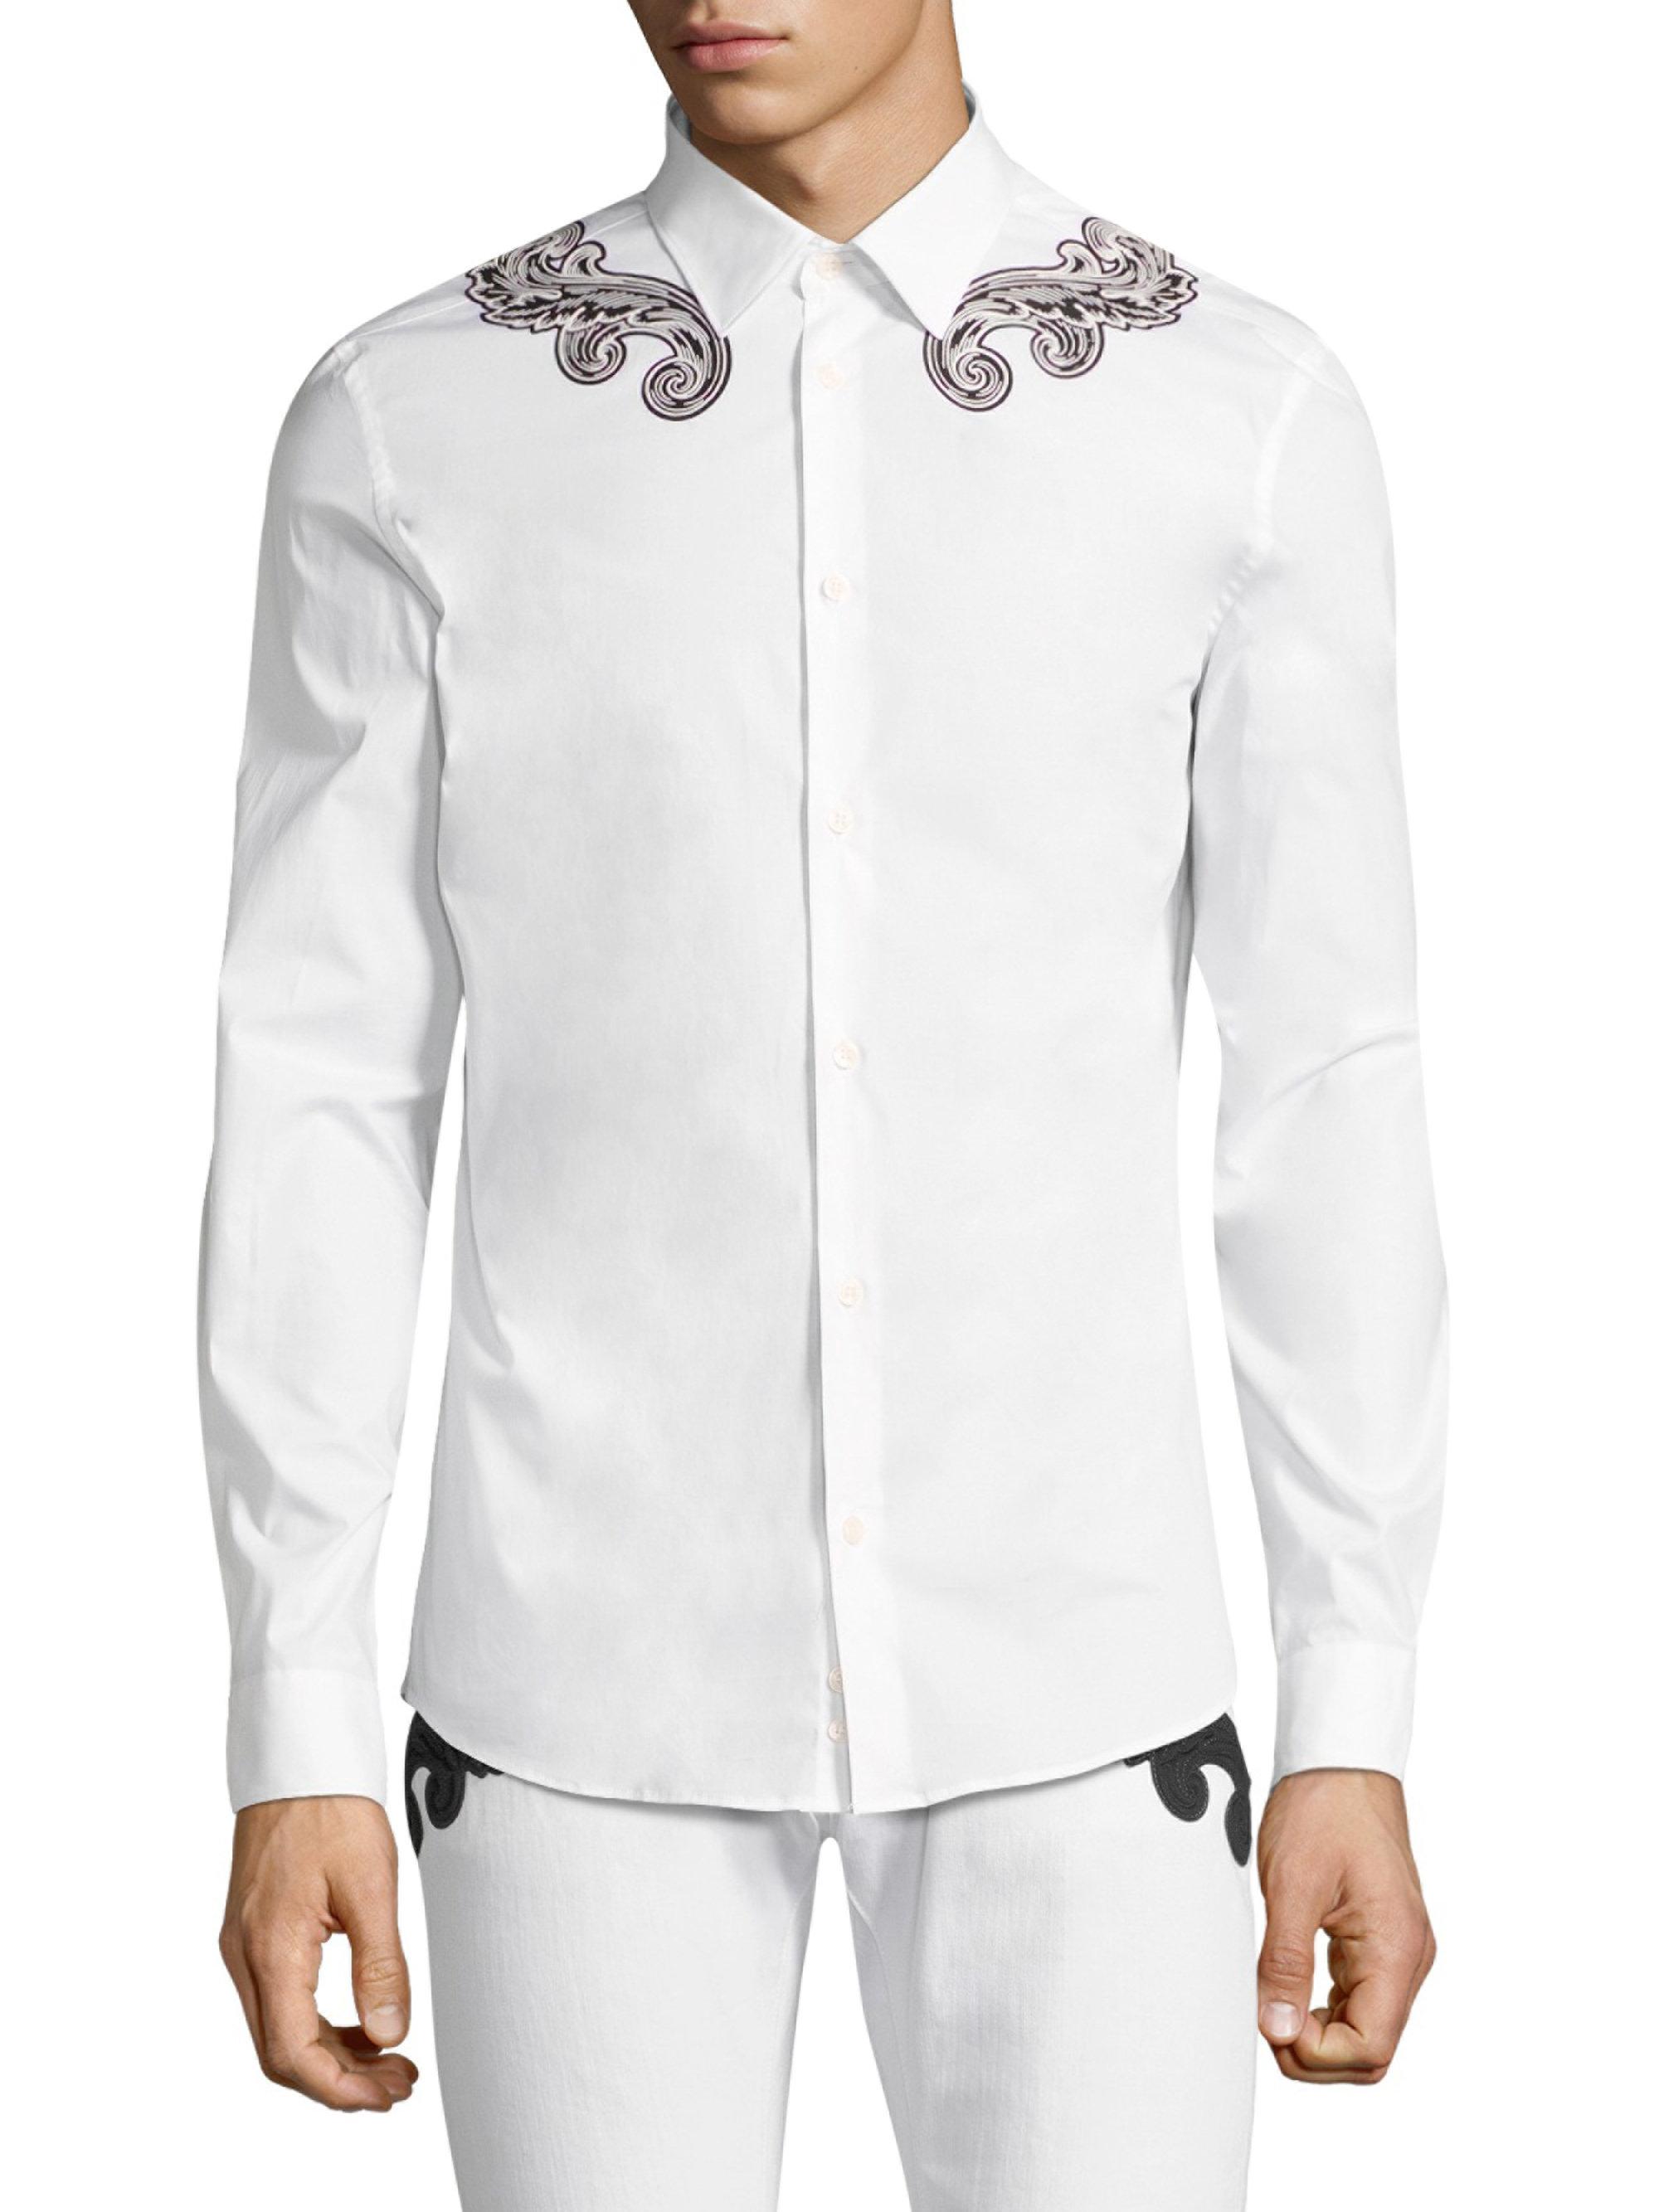 versace white button up